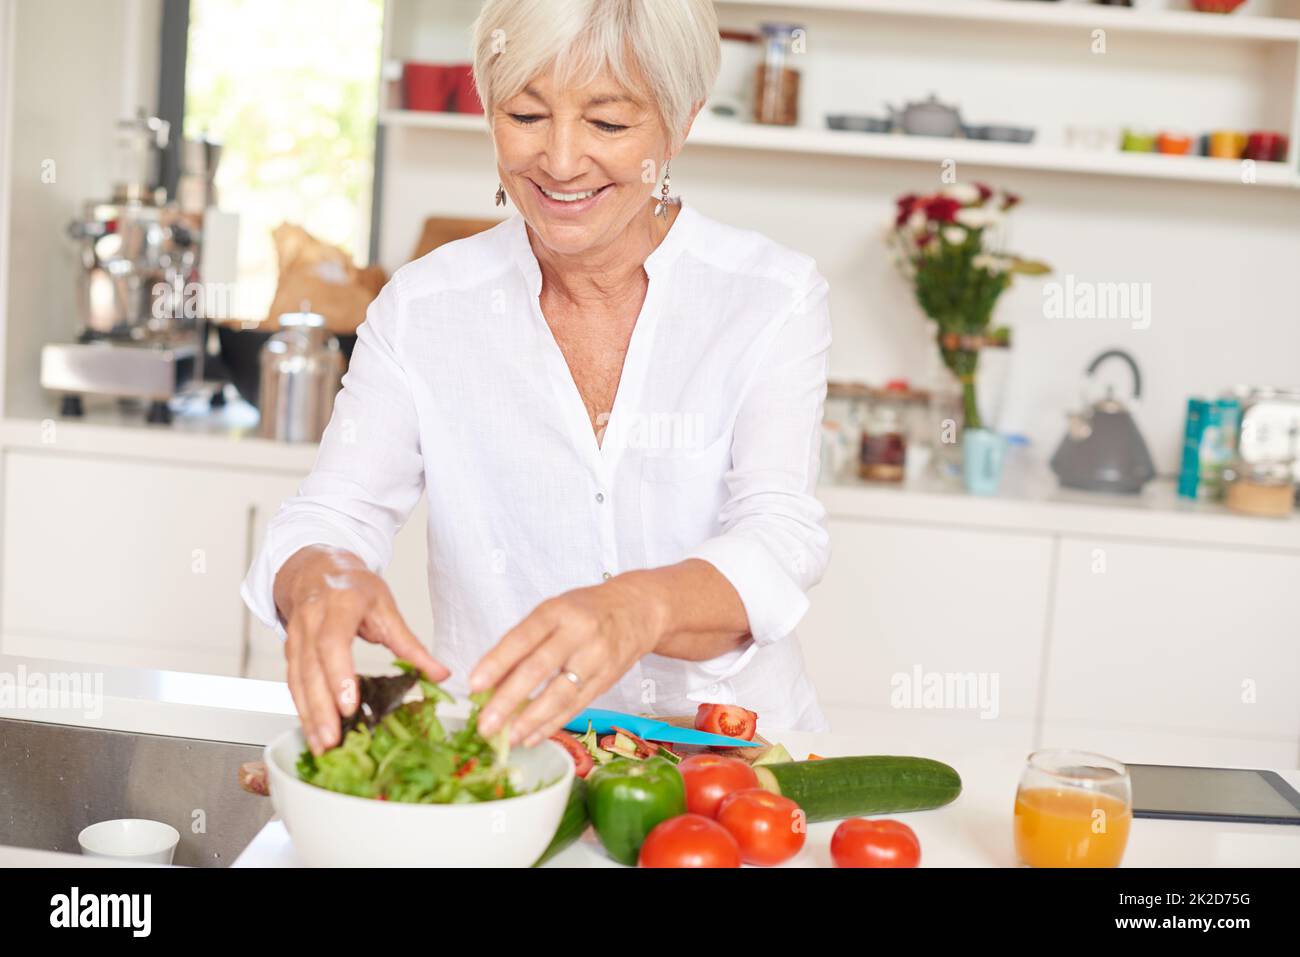 The secret to vitality is a healthy diet. Shot of a senior woman making a salad in her kitchen. Stock Photo